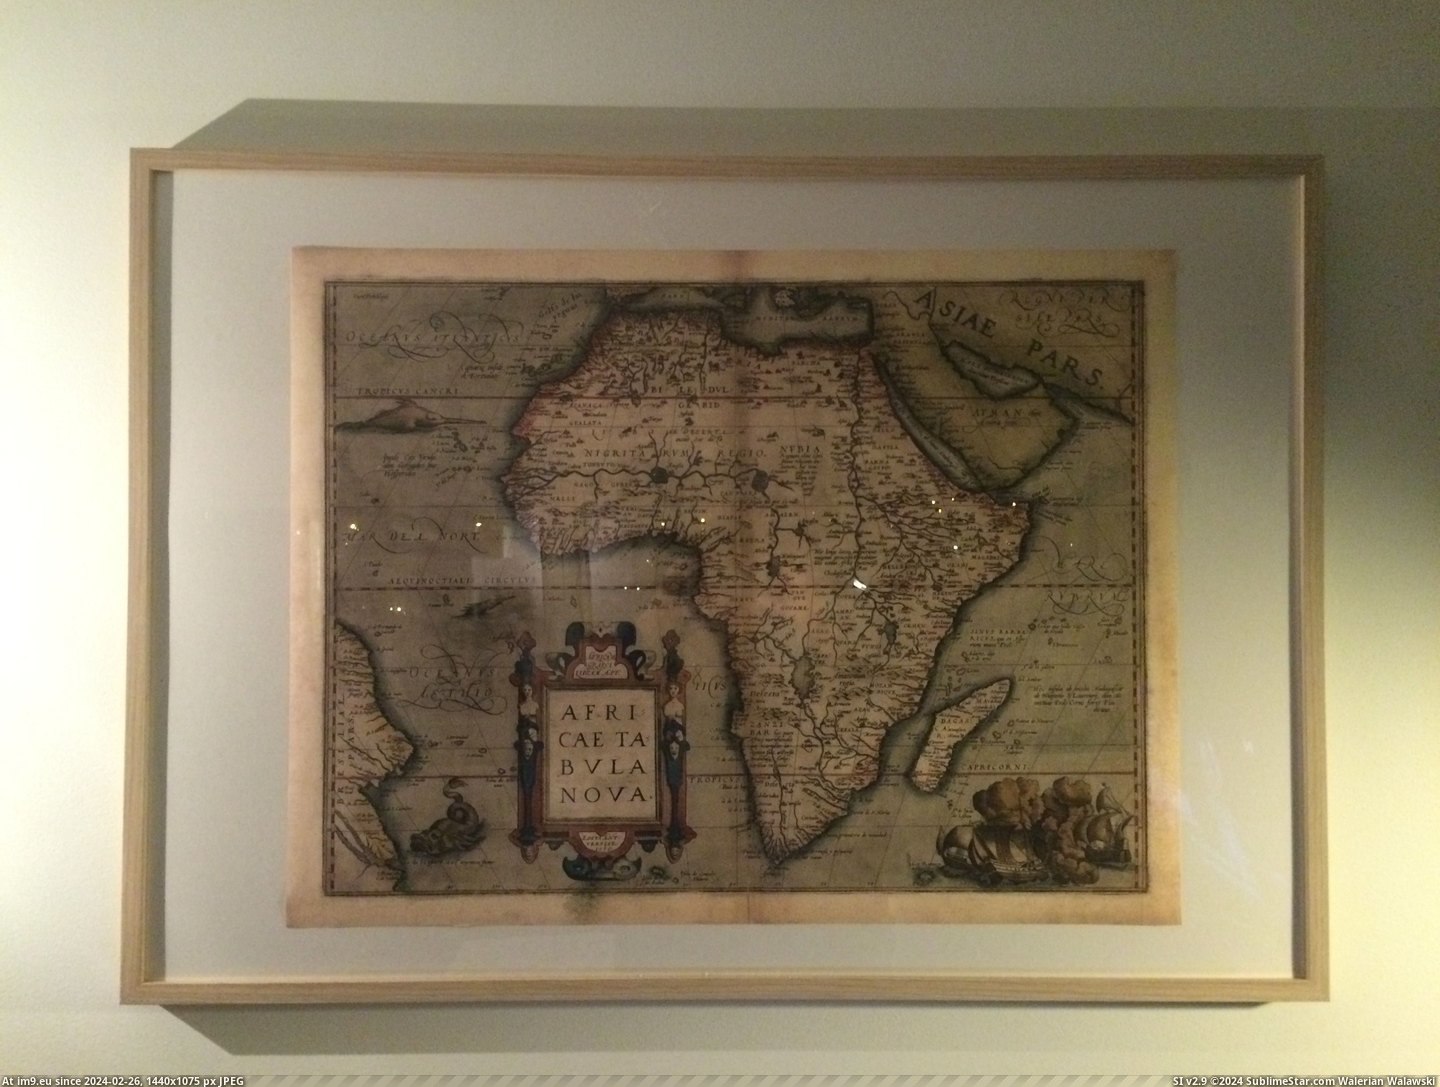 #White #Great #Map #Africa #Received #Replica #Spice #Way #Giant #Wall [Mapporn] Just received a replica of a 1570 map of Africa! Great way to spice up a giant white wall [3264 x 2448] Pic. (Изображение из альбом My r/MAPS favs))